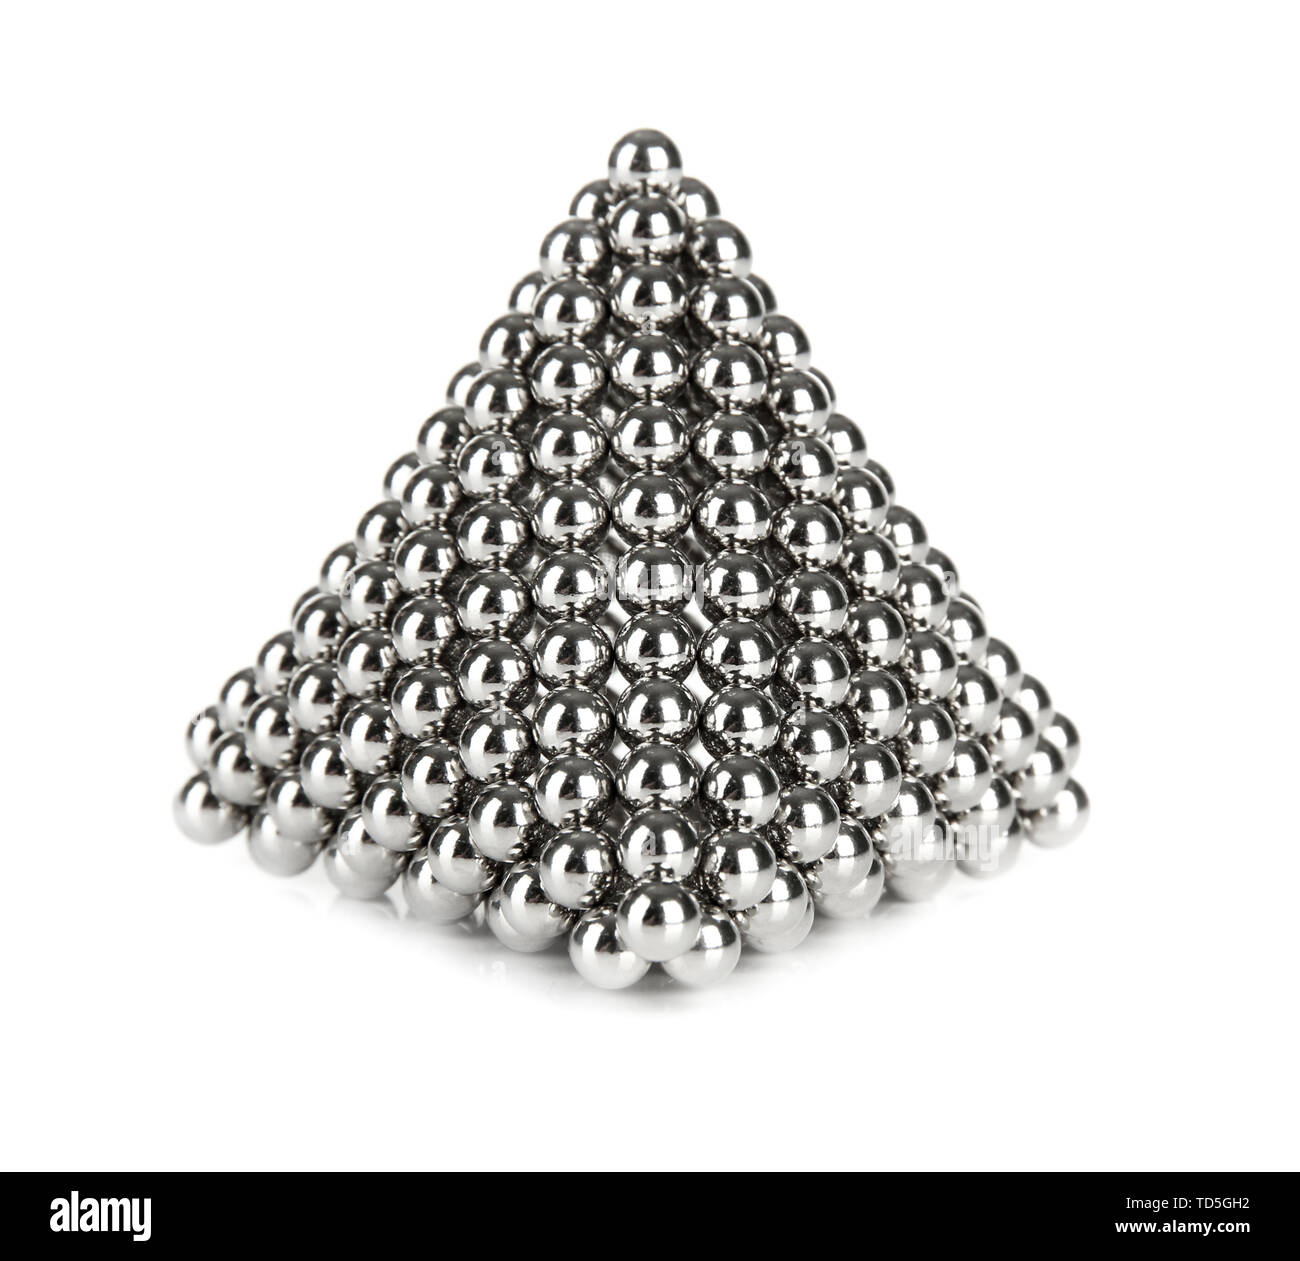 Pyramid of metal balls for neocube (toy), isolated on white Stock Photo -